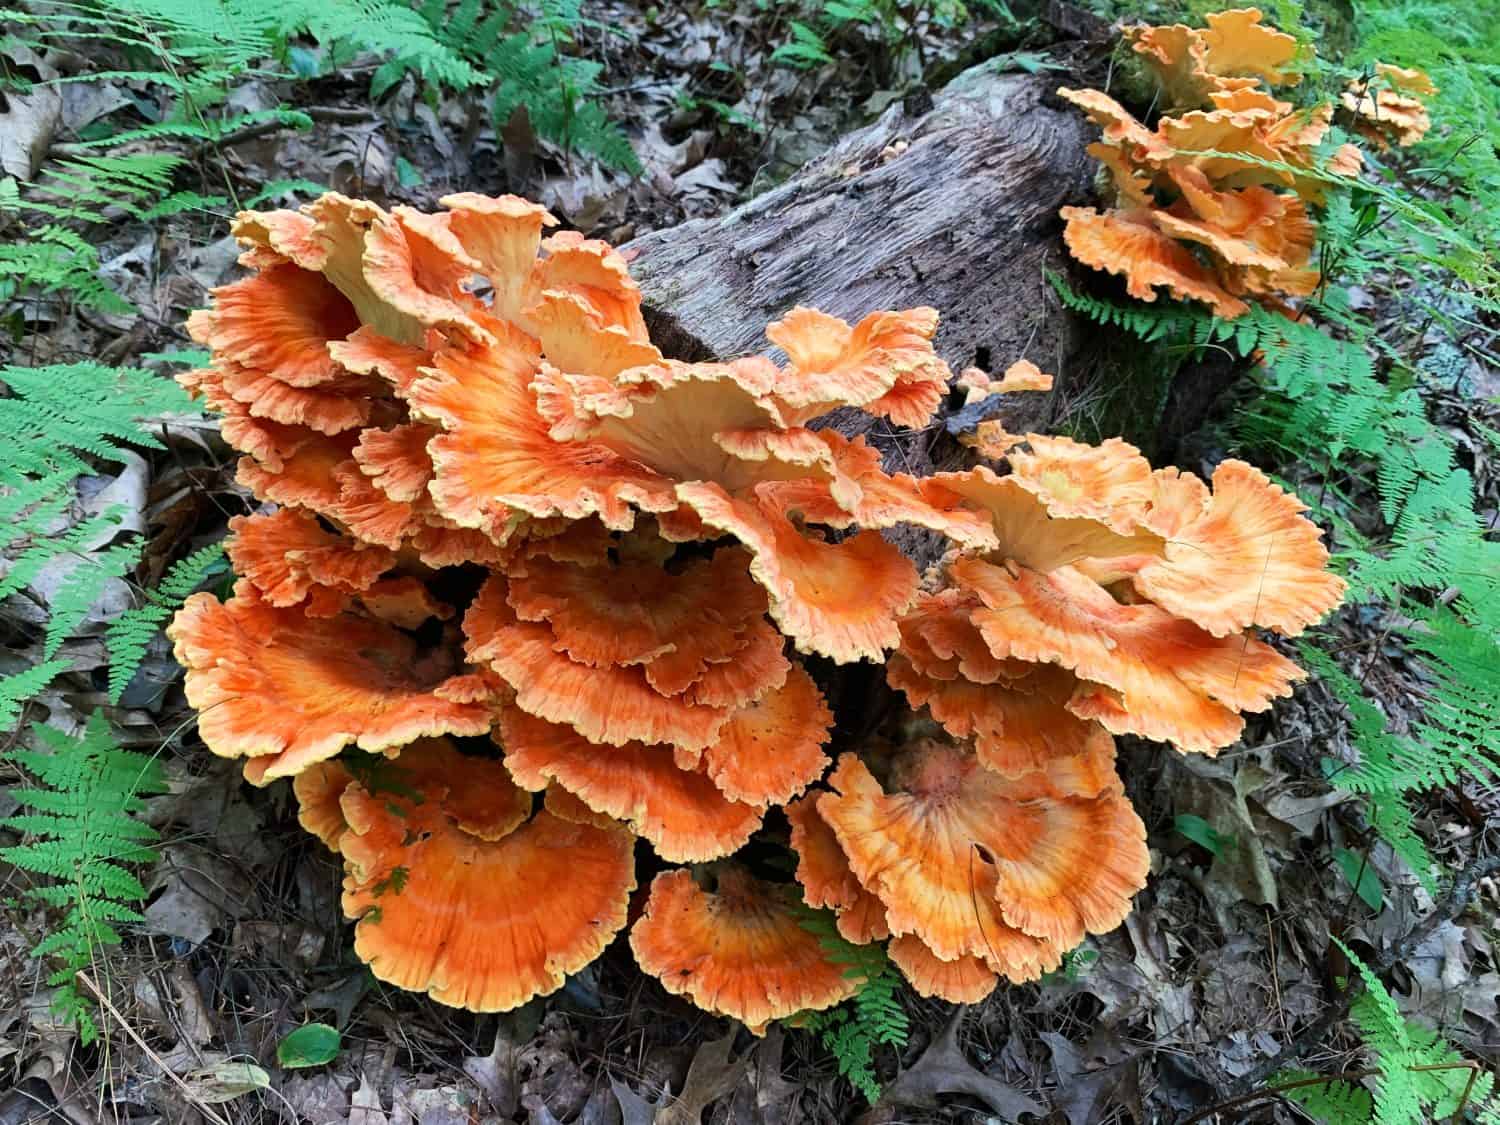 Chicken of the Woods mushroom (Sulfur Shelf) Part of the conks - polypore class of fungi. No skeletal hyphae making it edible. Deciduous forest growing. Laetiporus genus.